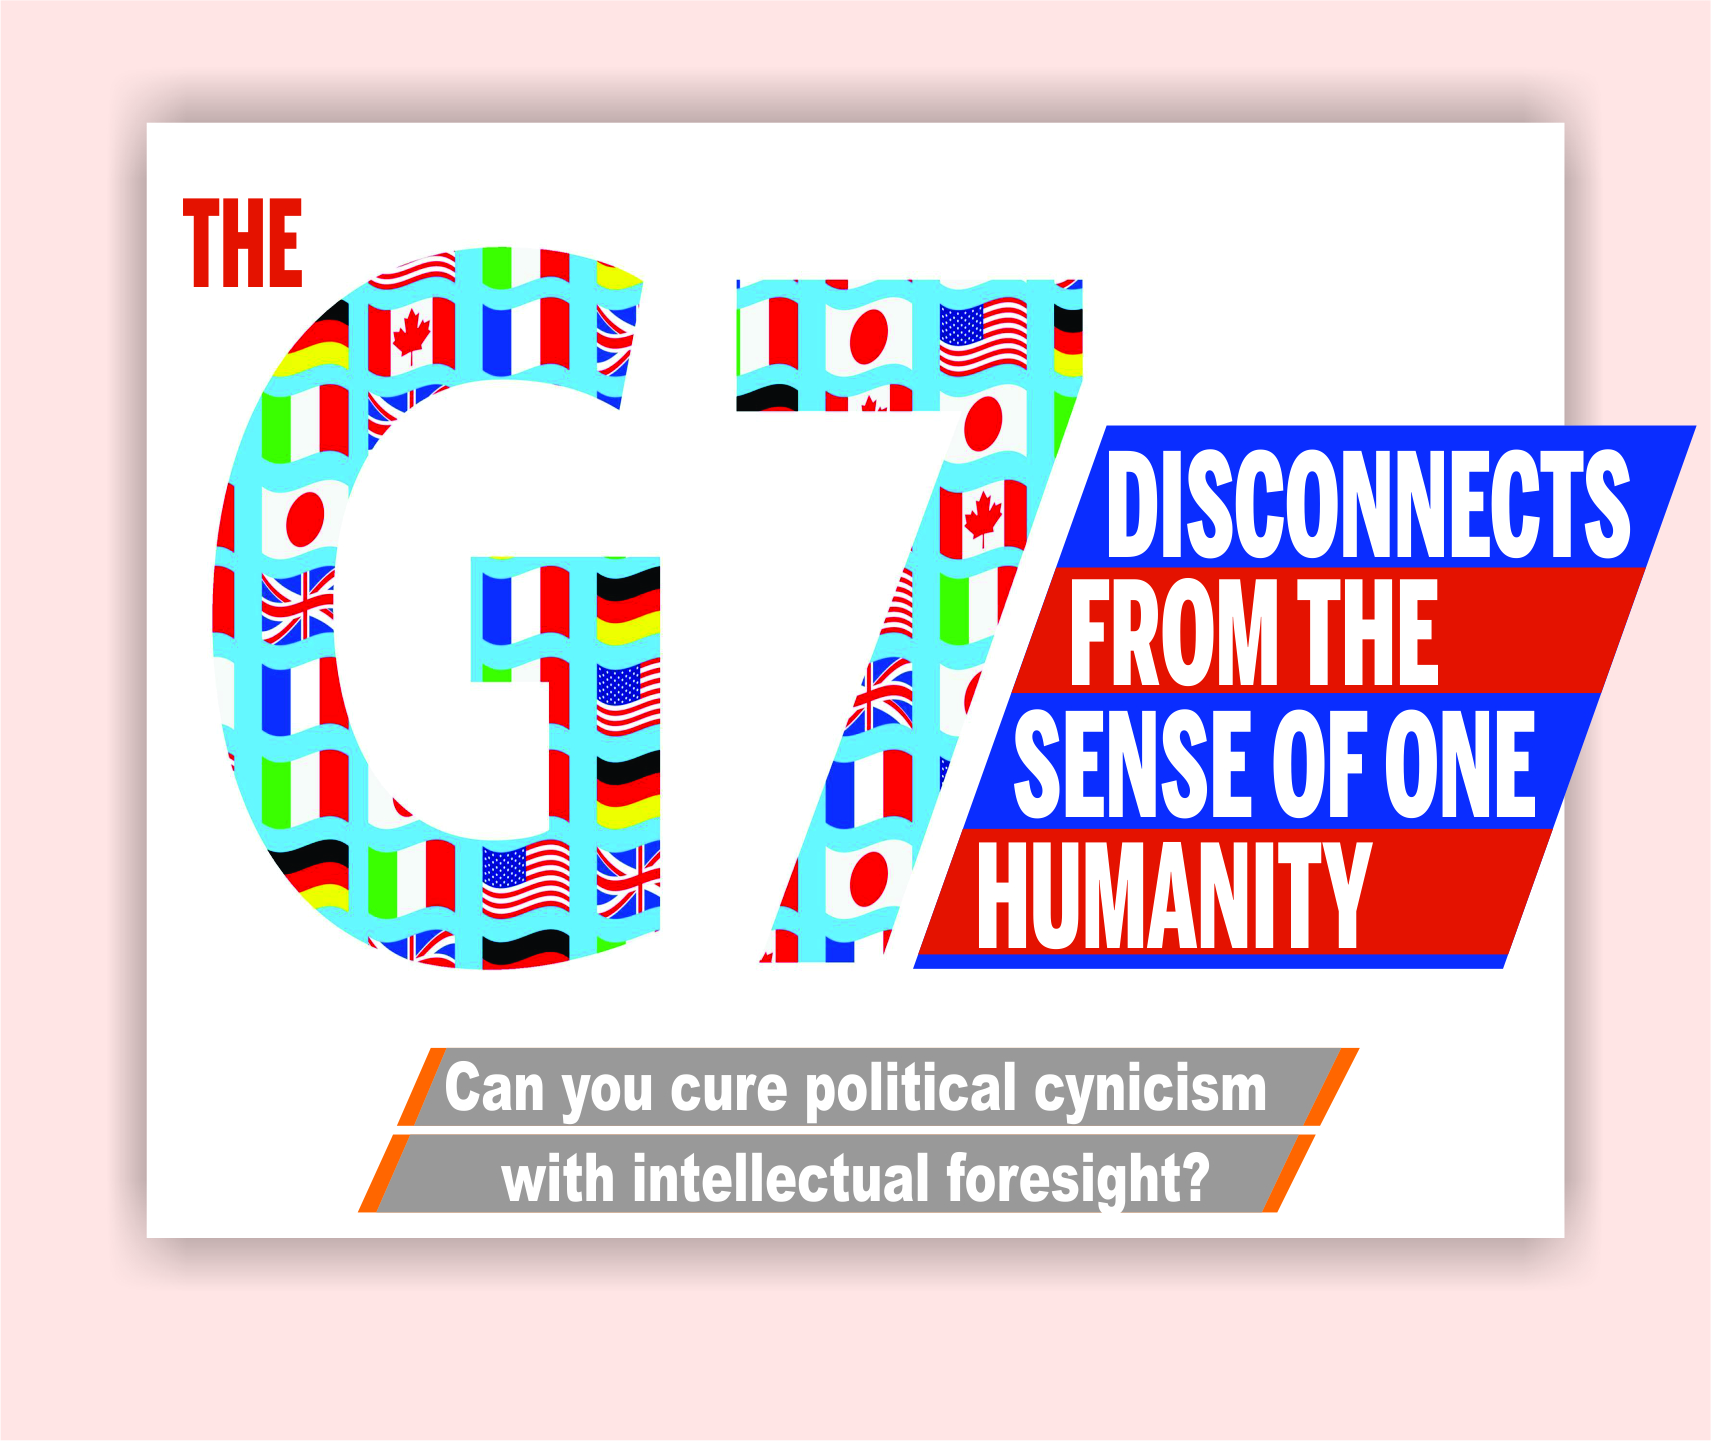 You are currently viewing The G7 Disconnects from the Sense of one Humanity